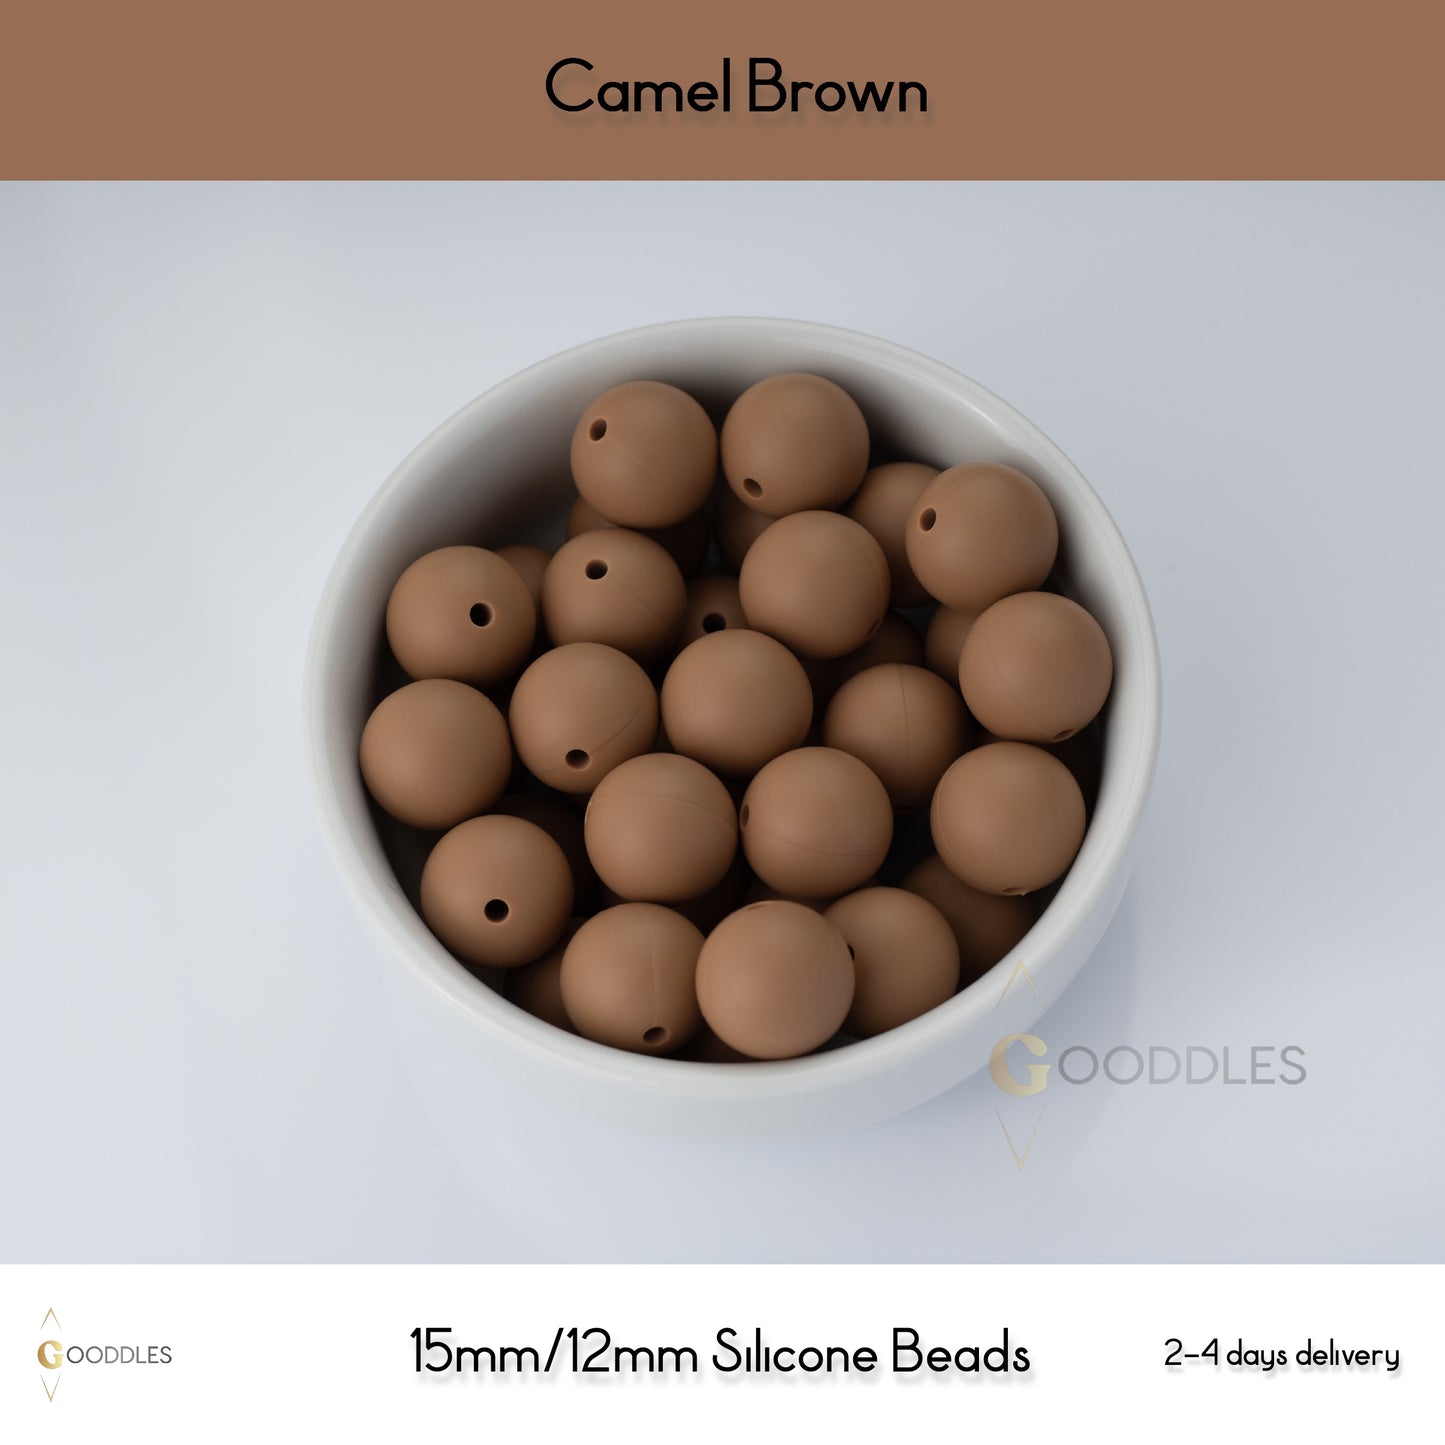 5pcs, Camel Brown Silicone Beads Round Silicone Beads